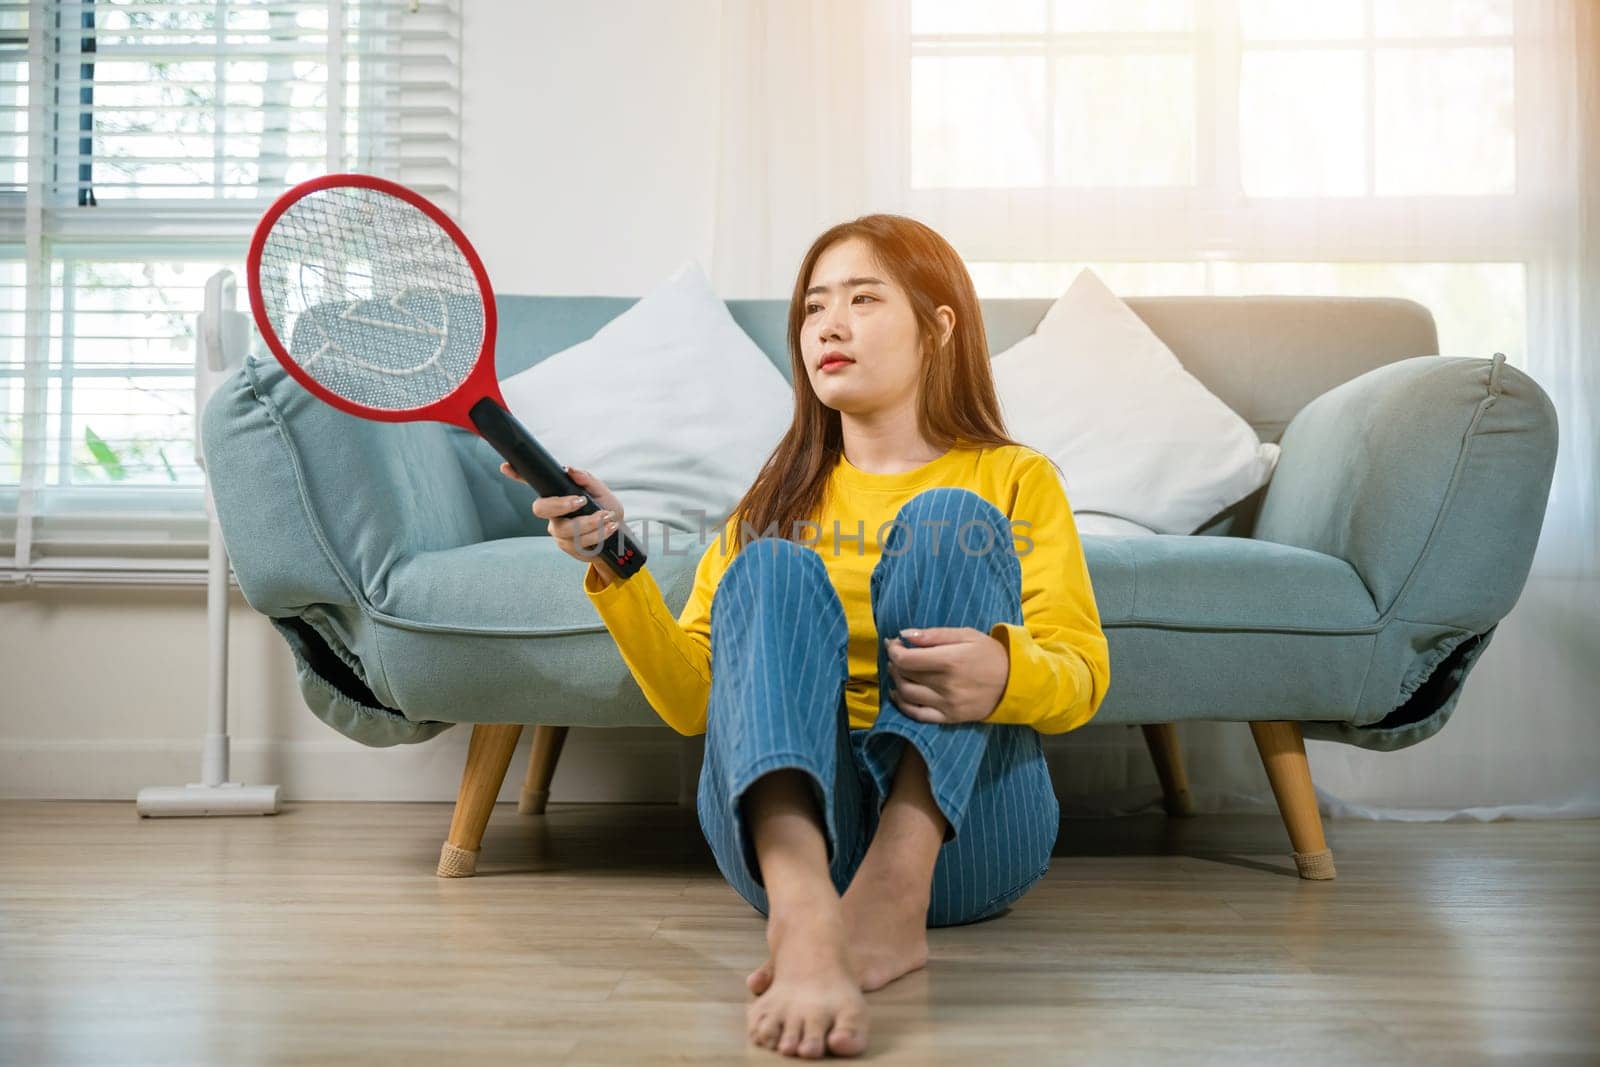 Woman killing mosquitoes hand holding fly swatter like weapon in living room at home, Asian young female sitting floor using mosquito swatter or electric net racket, technology insect killer